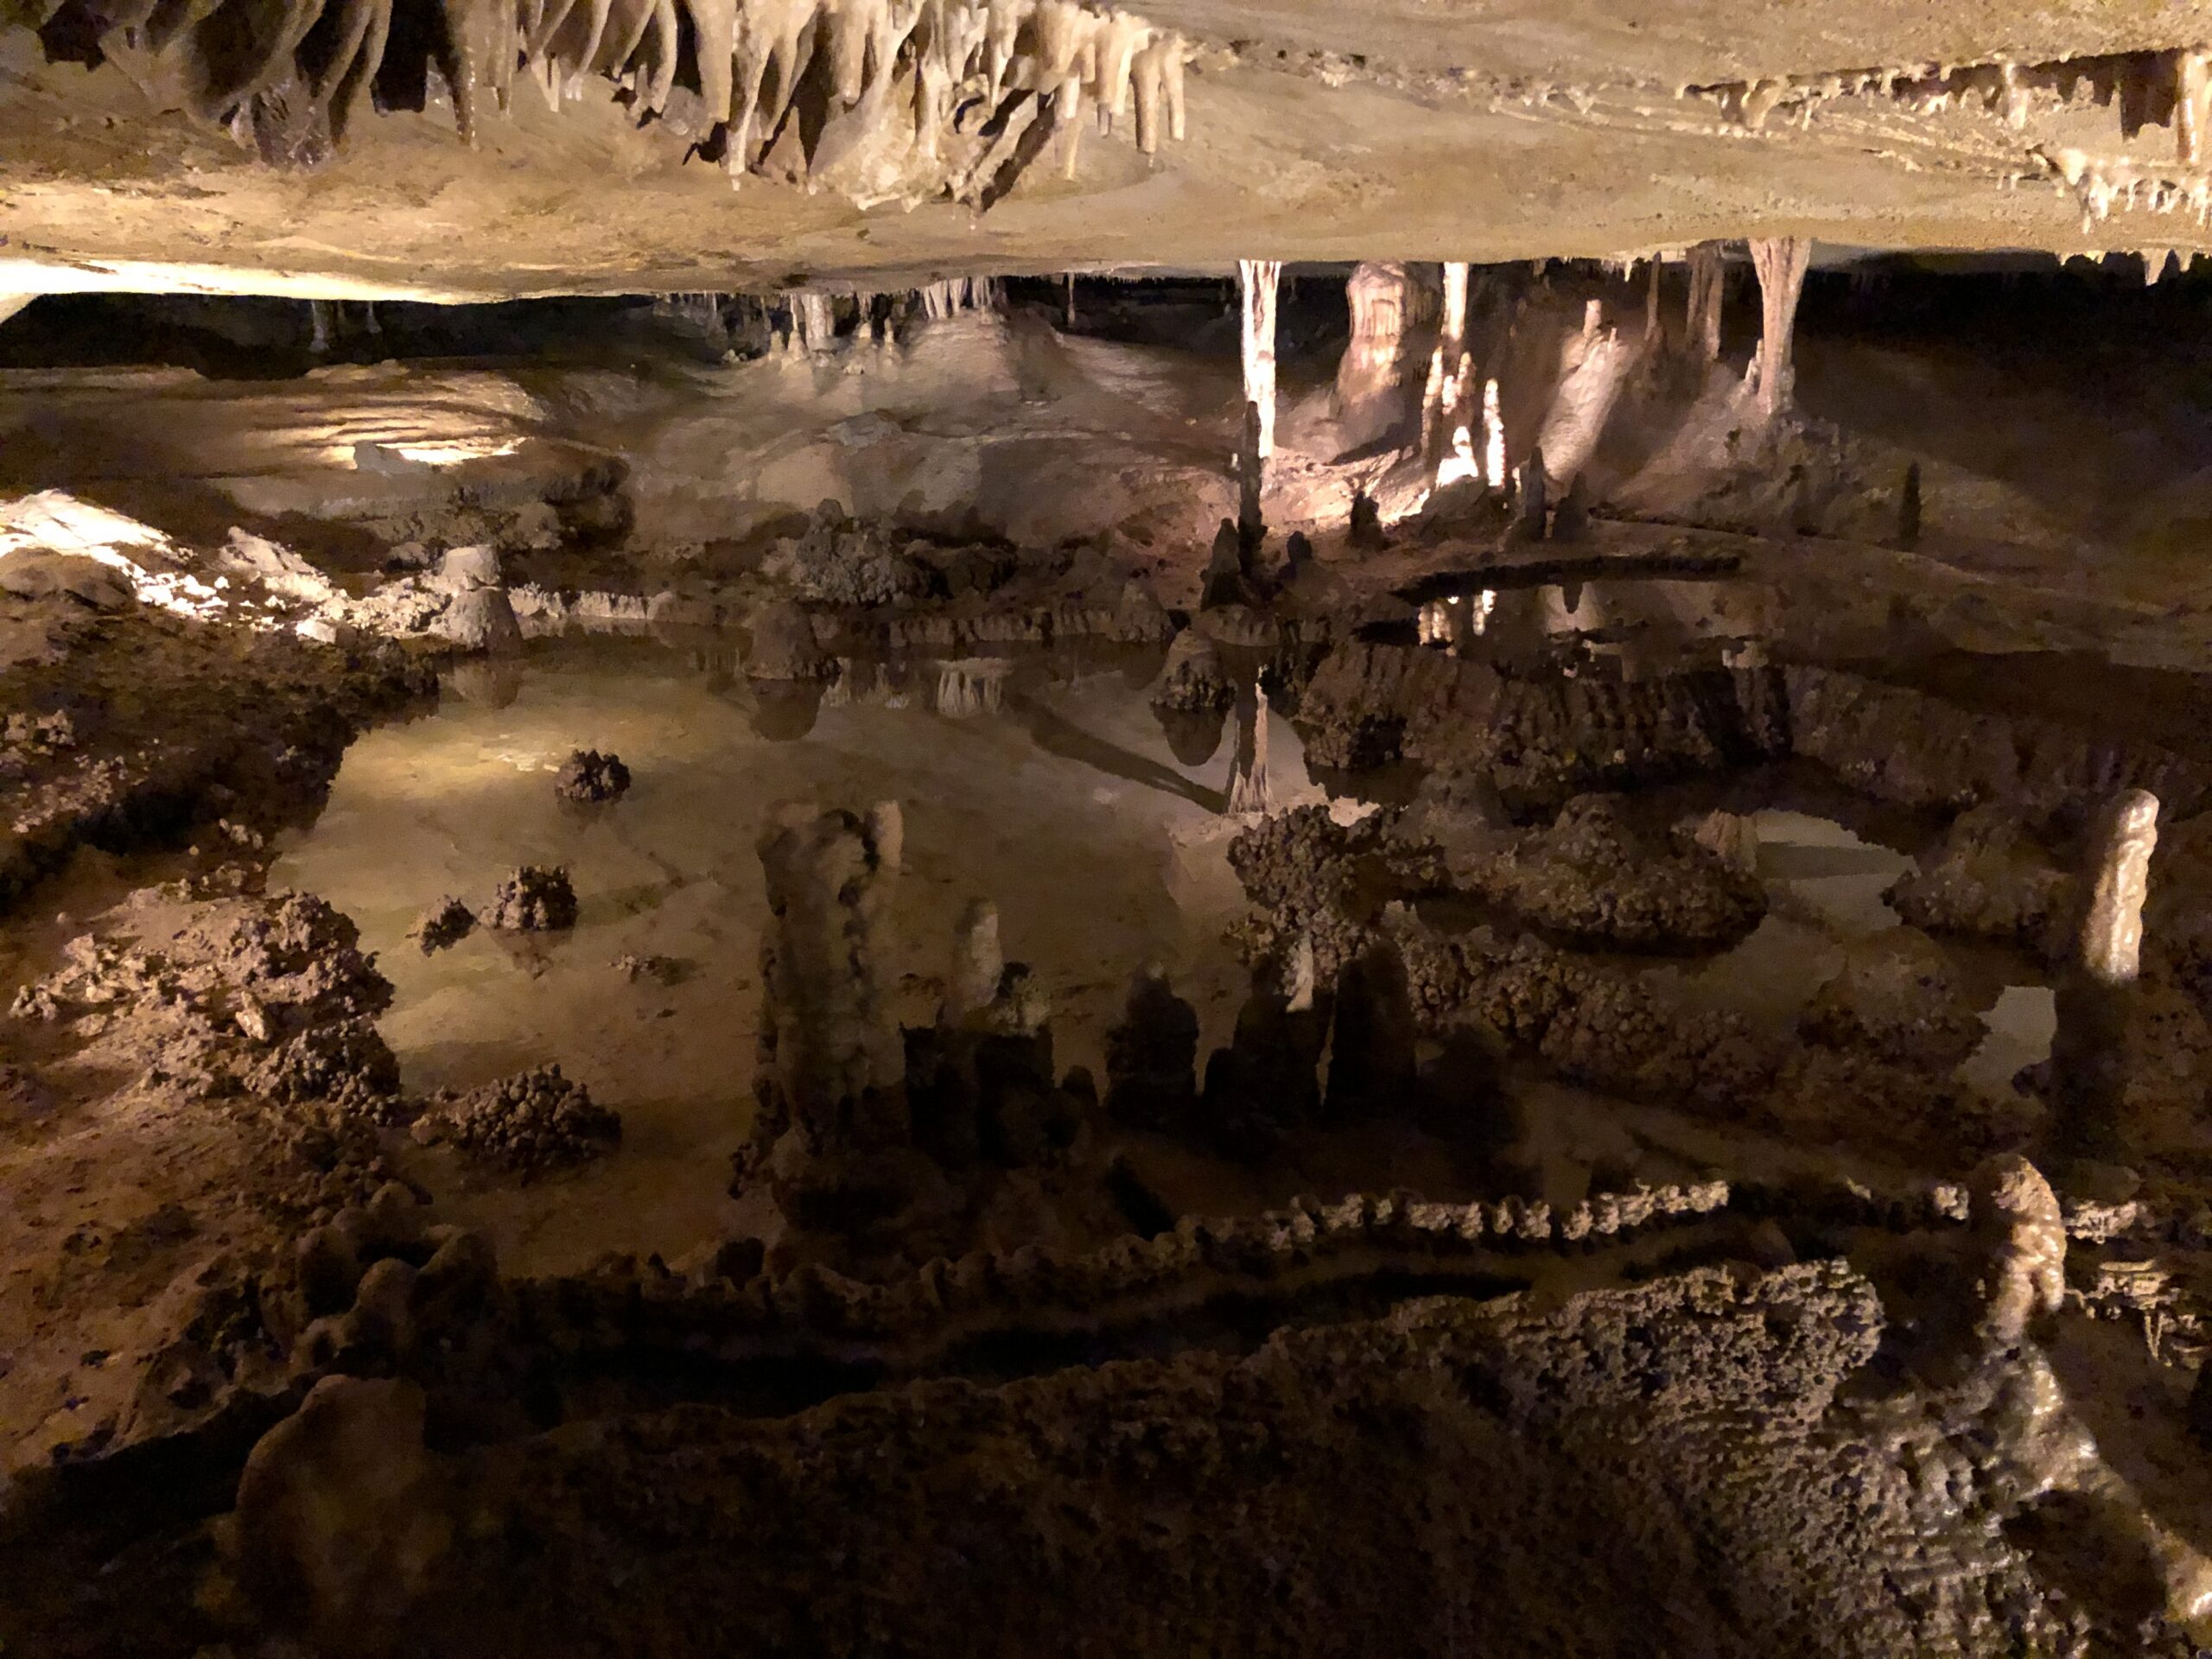 Tips for visiting Morengo Cave